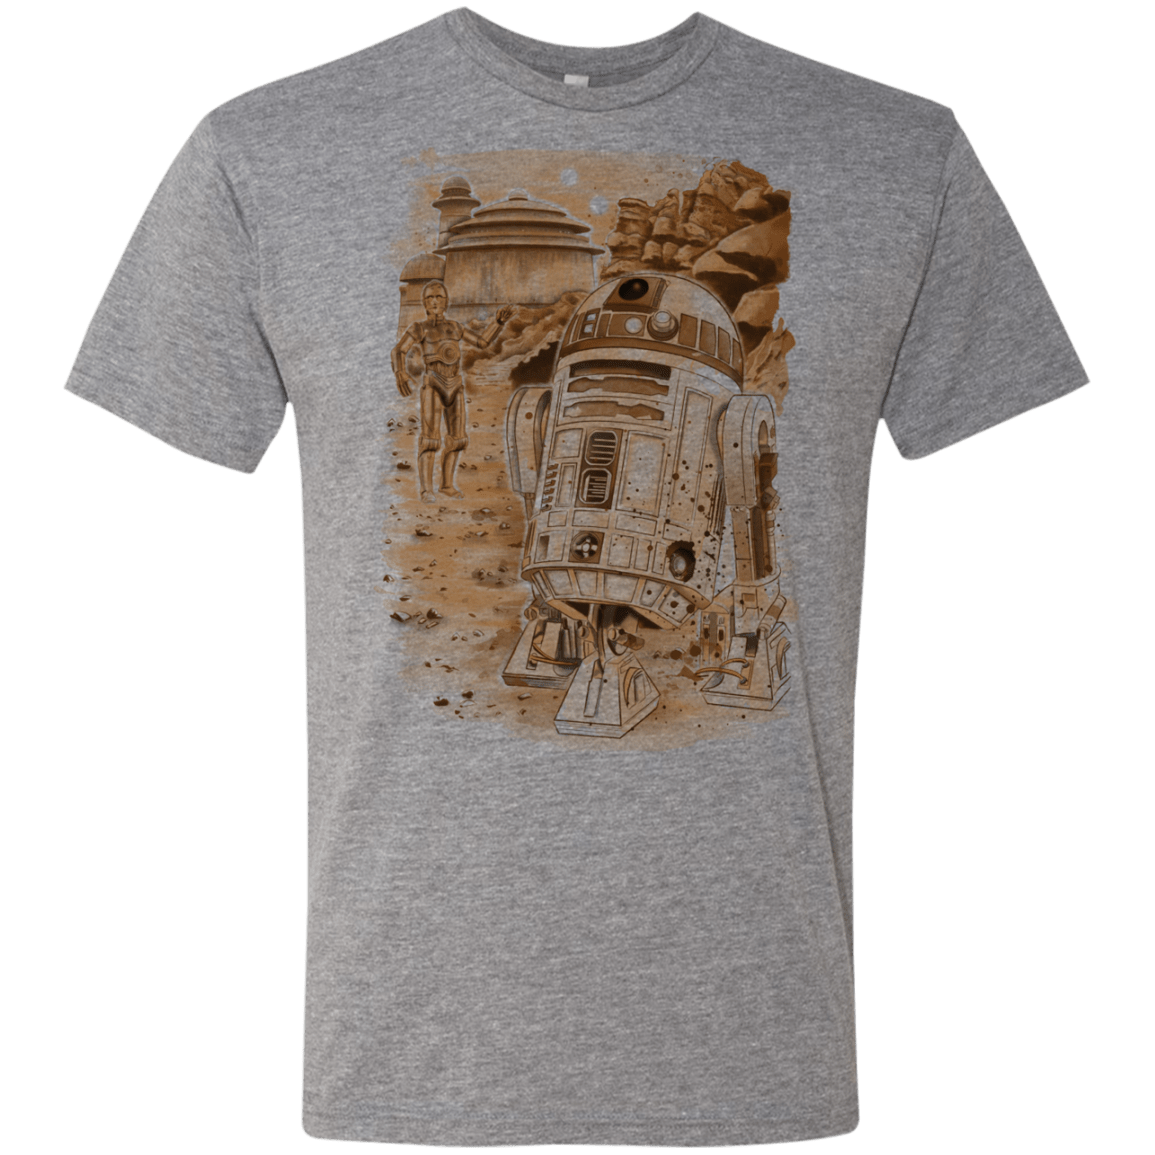 Mission to jabba palace Men's Triblend T-Shirt